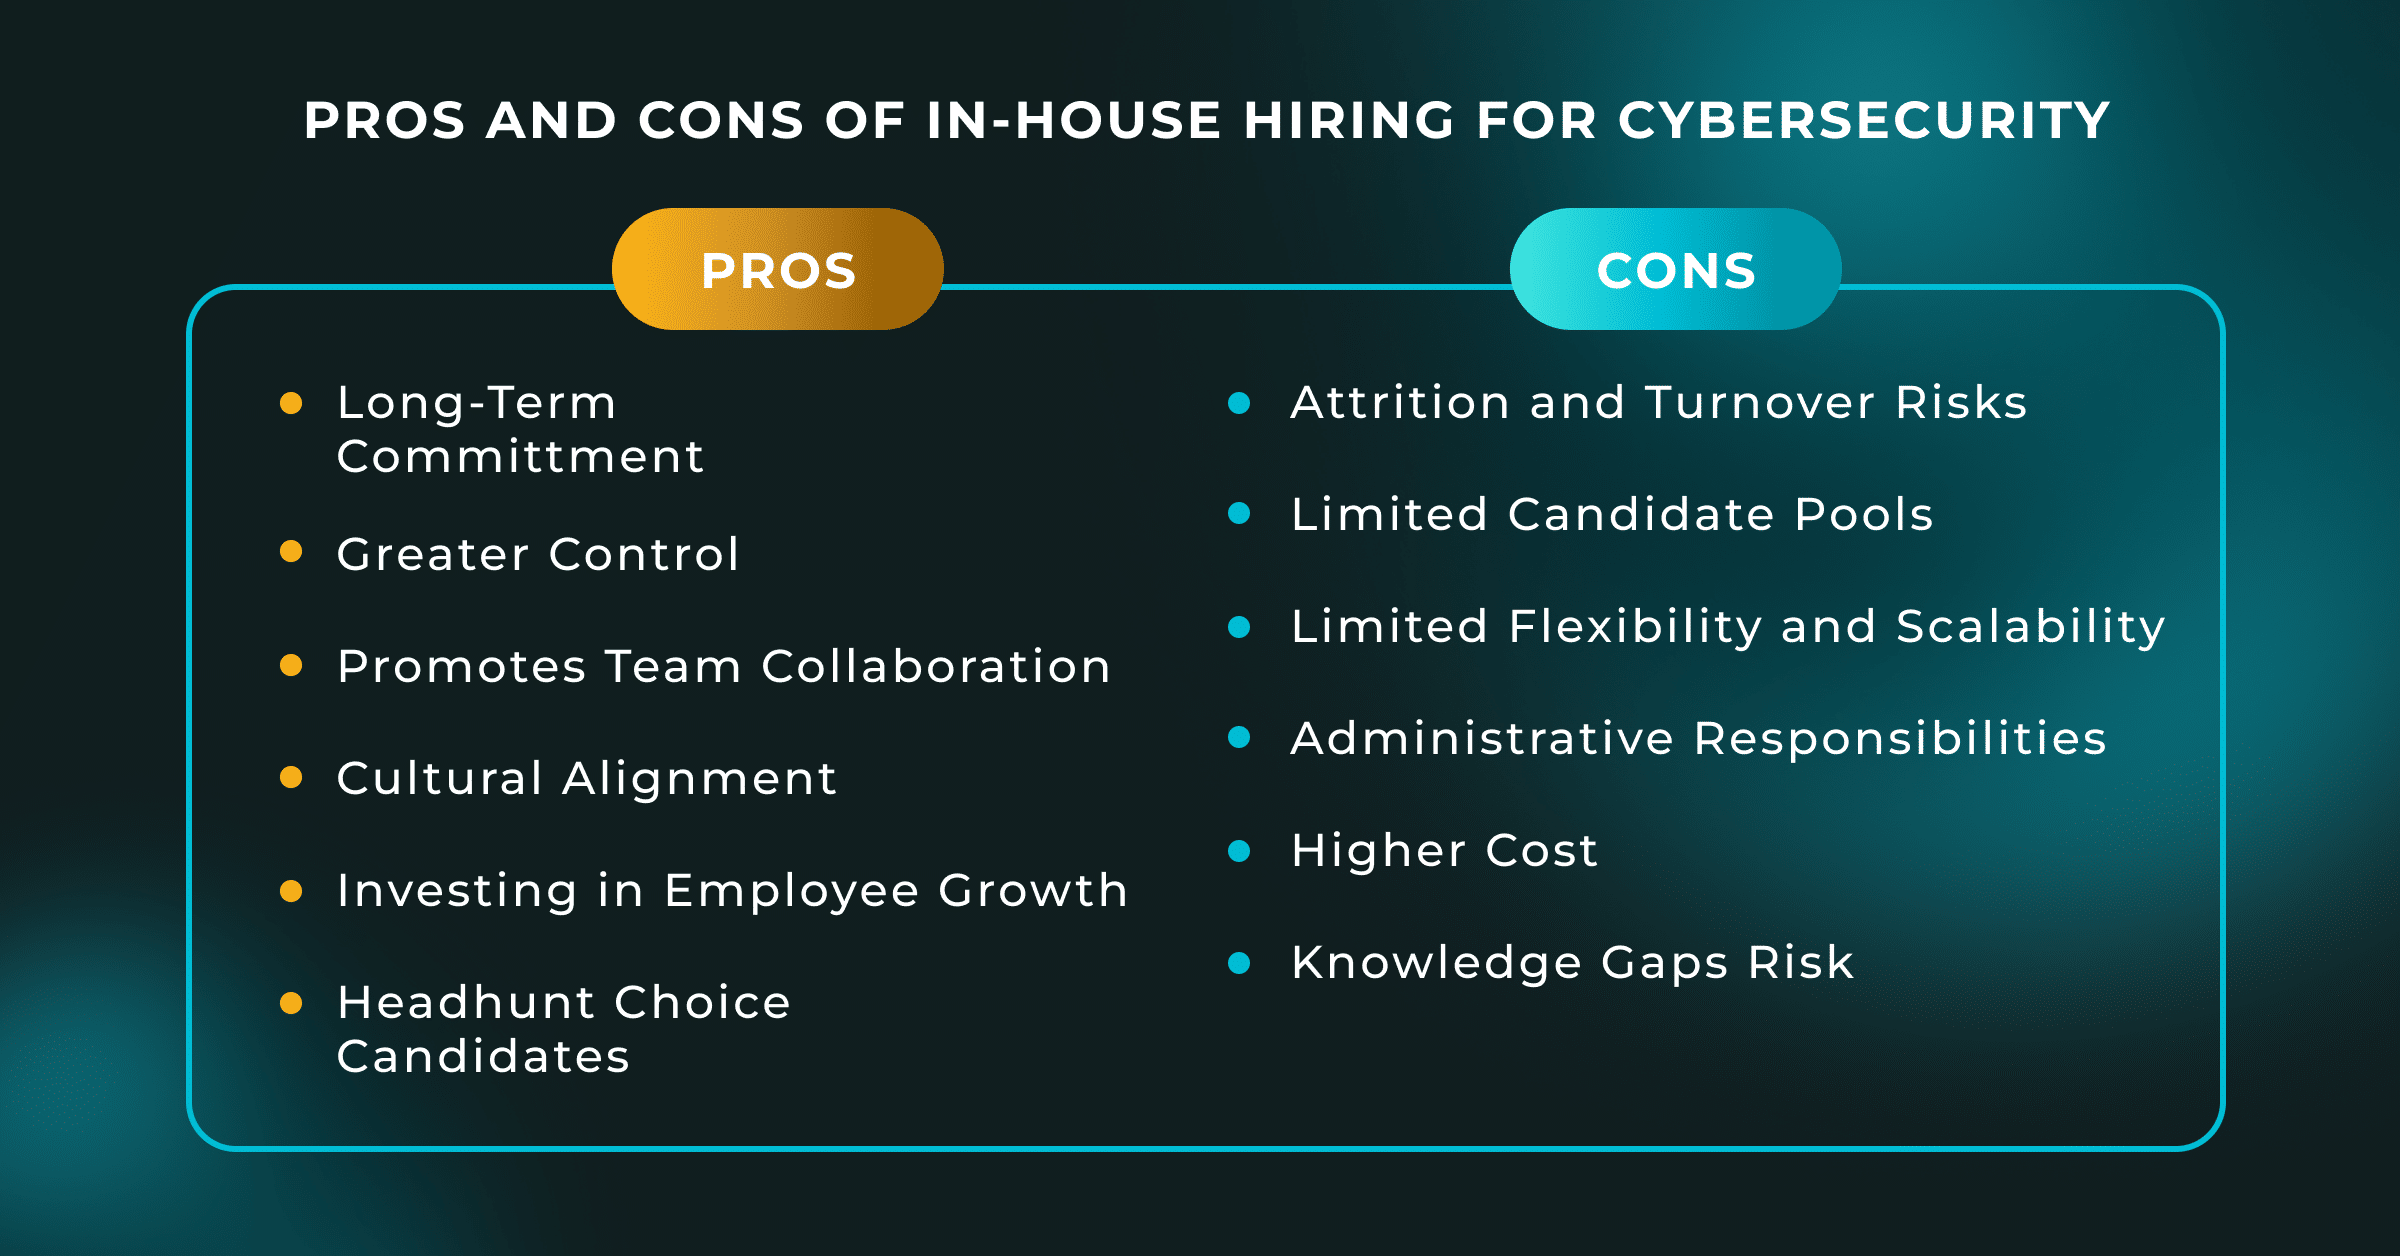 In-House Hiring for Cybersecurity: Pros and Cons